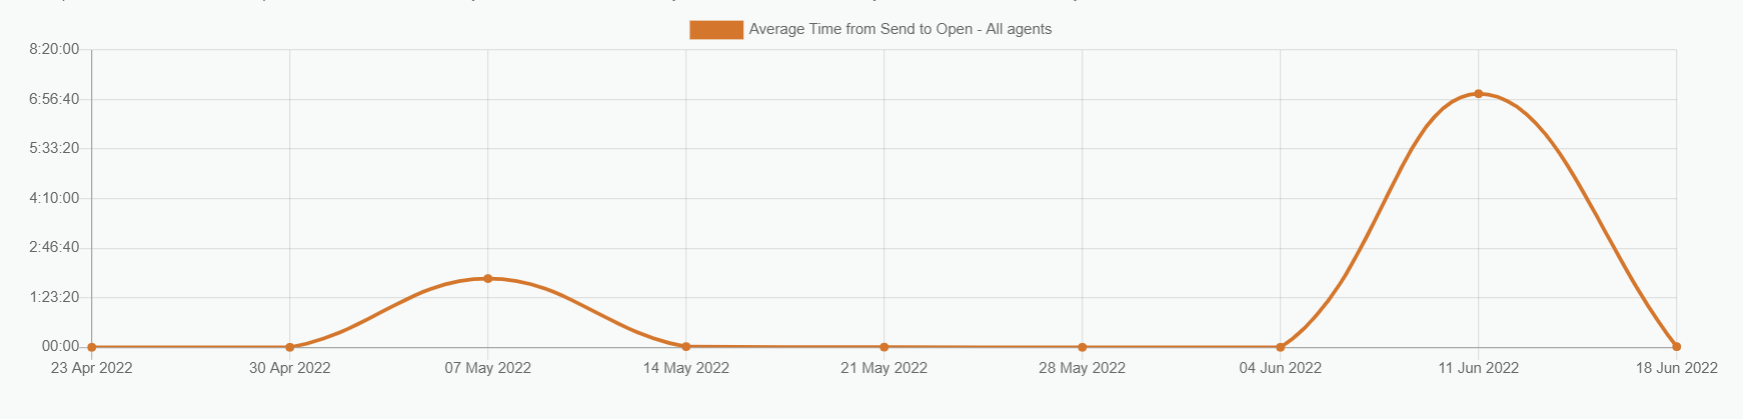 Average Time From Send to Open